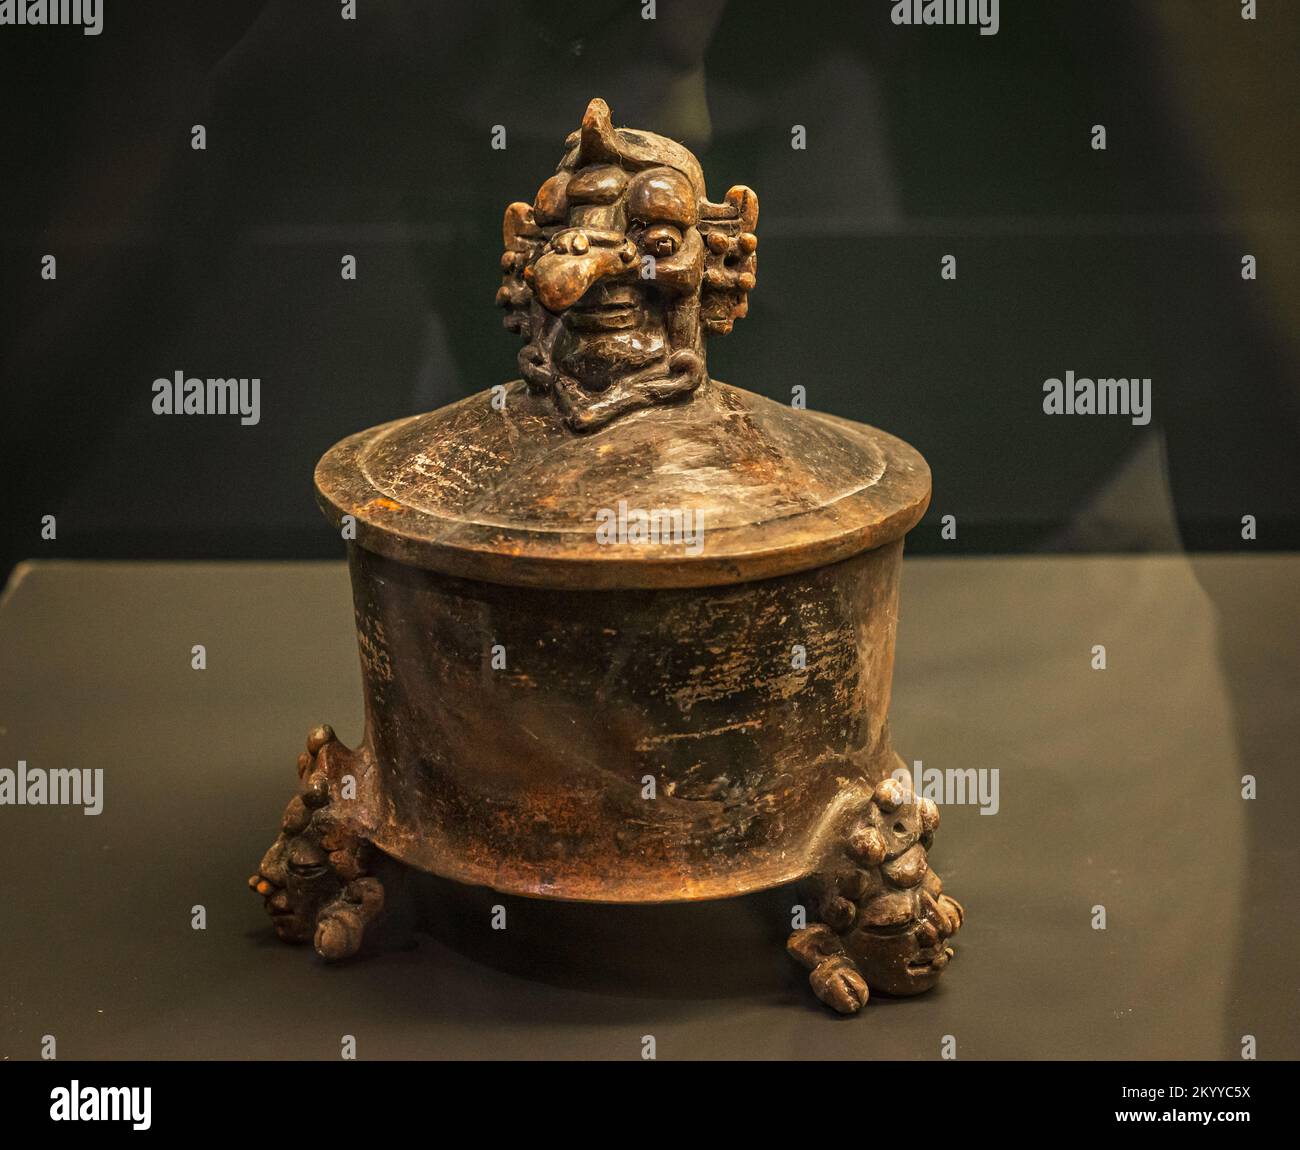 Maya vessel which was an offering to king  Tuun Kʼabʼ Hix, found in Calakmul, Campeche. Early classic period. Stock Photo